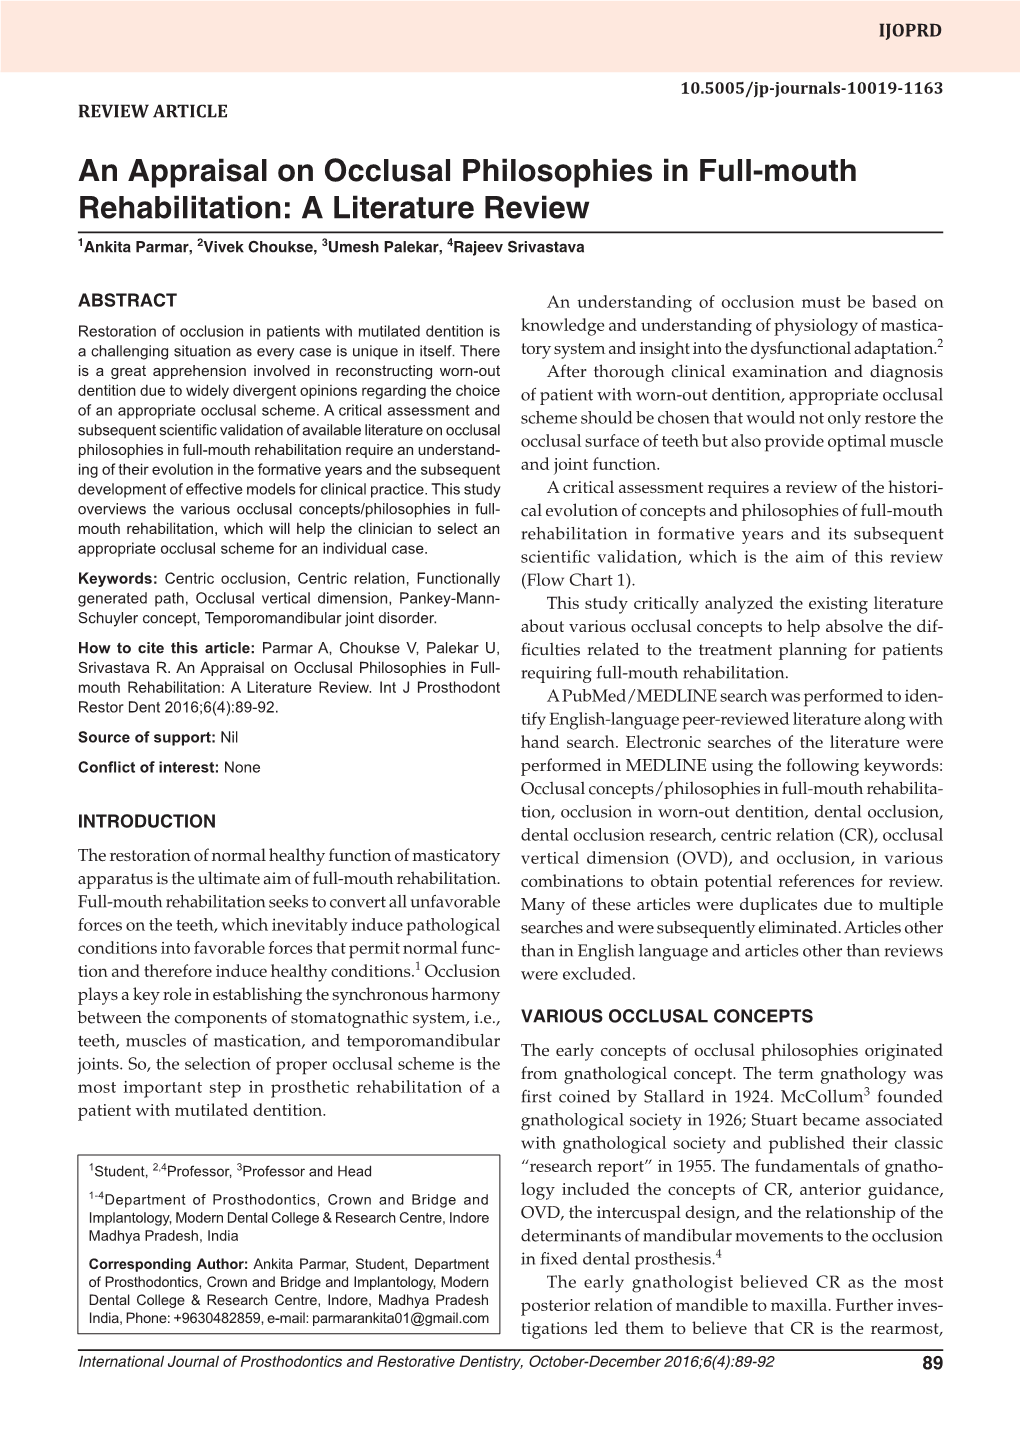 An Appraisal on Occlusal Philosophies in Full-Mouth10.5005/Jp-Journals-10019-1163 Rehabilitation: a Literature Review REVIEW ARTICLE